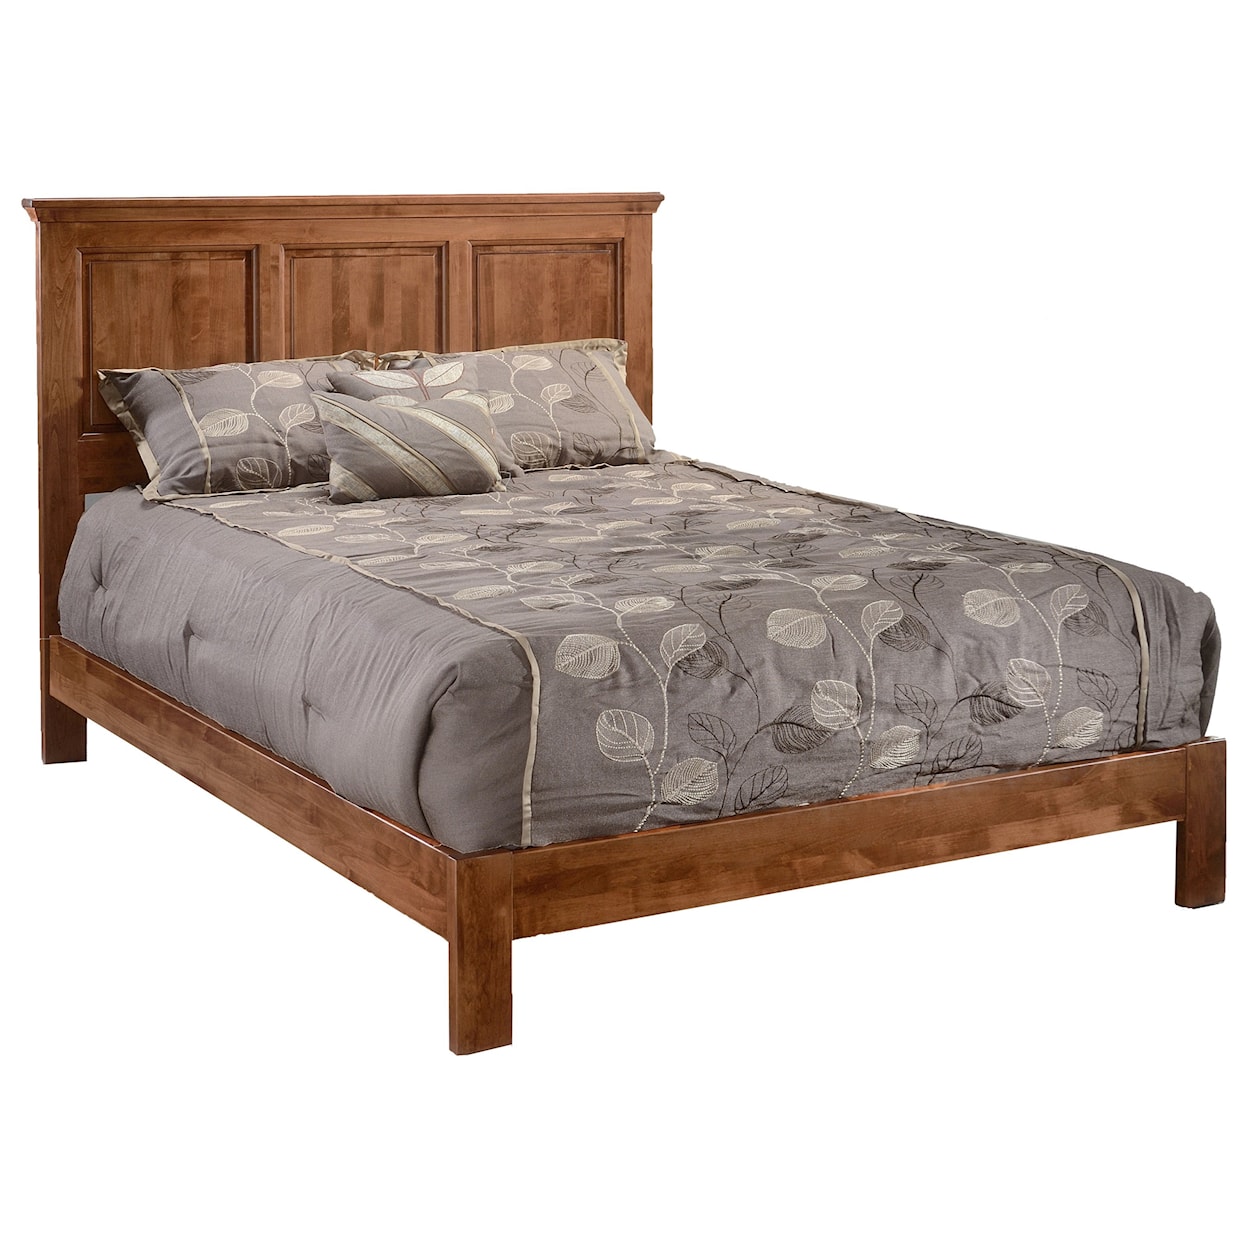 Archbold Furniture Heritage Twin Raised Panel Bed